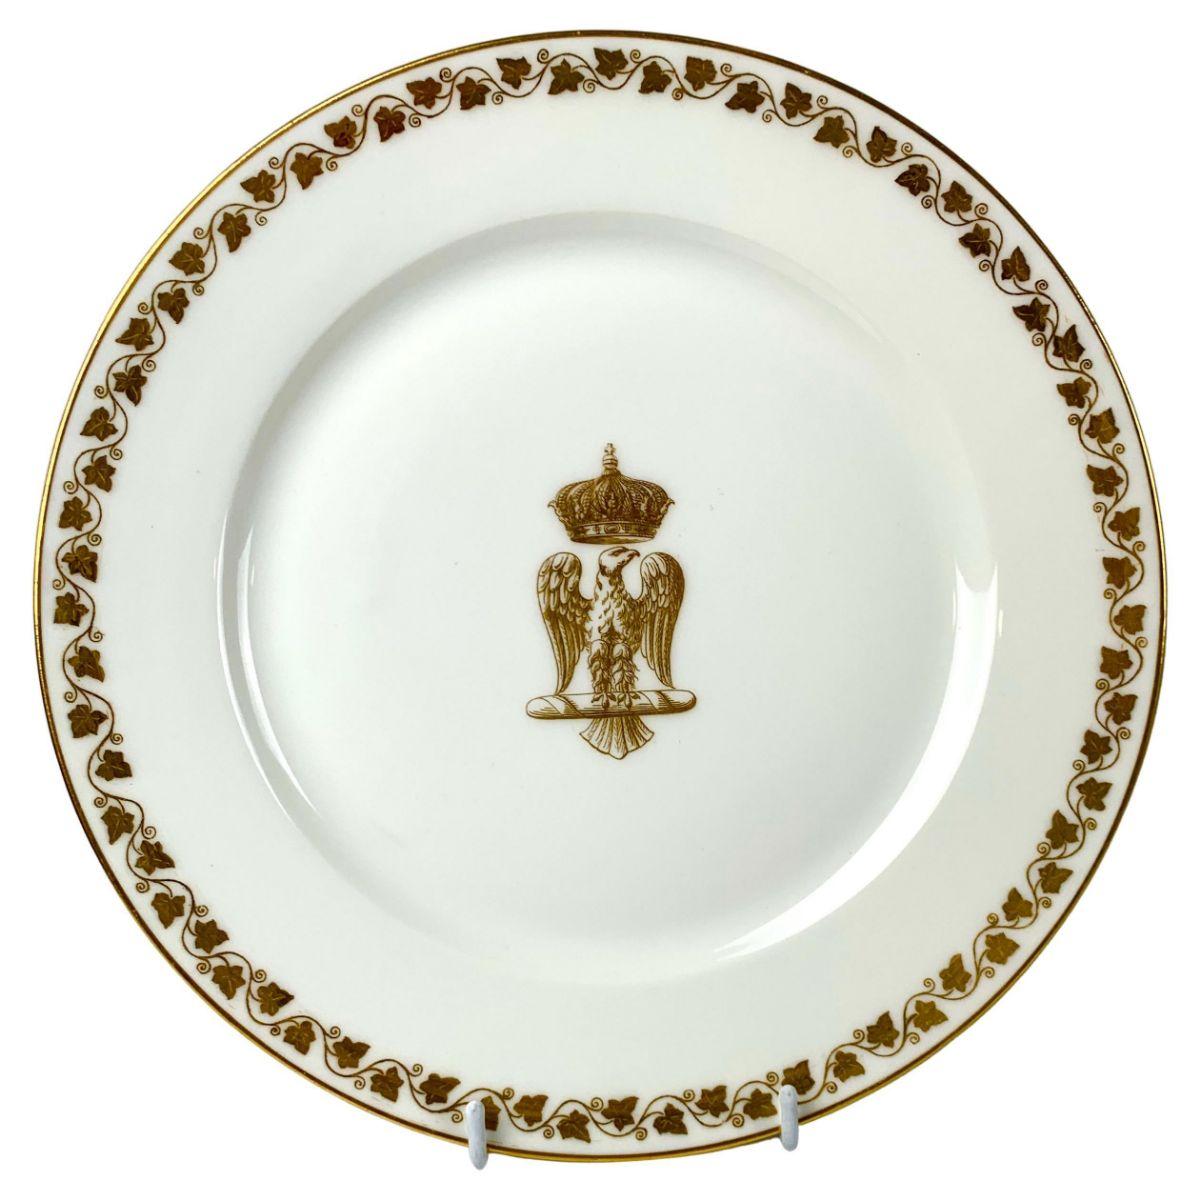 French Set Six Dinner Plates w/ Napoleonic Imperial Eagle in Style of Sèvres